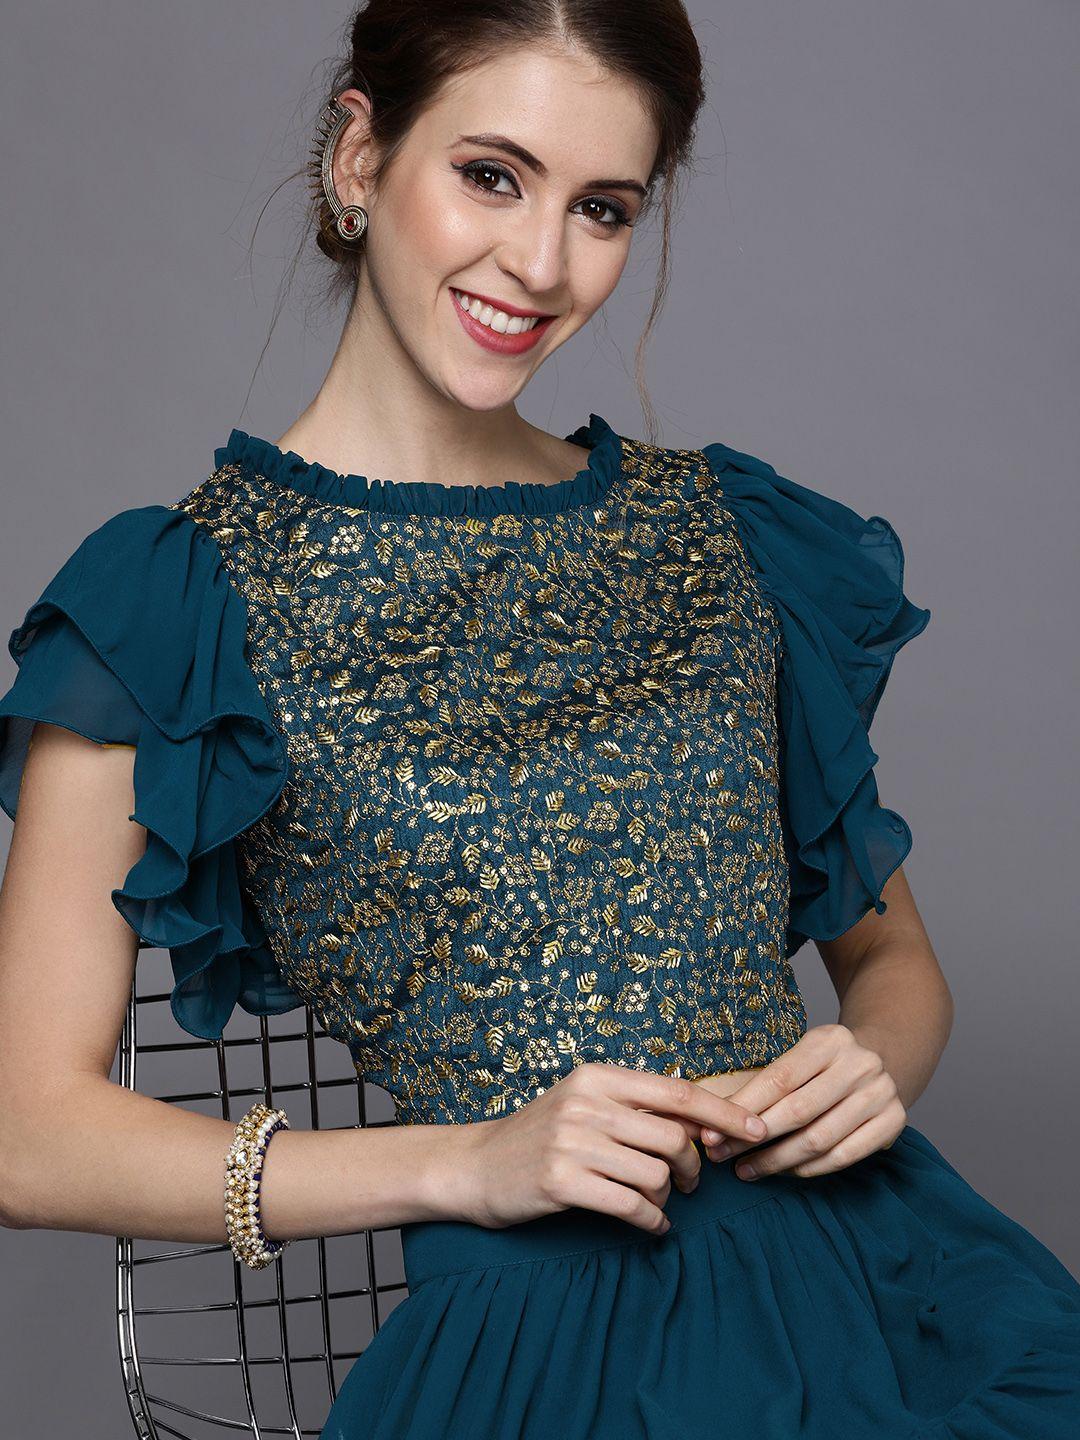 inddus women teal green & golden embroidered top with skirt